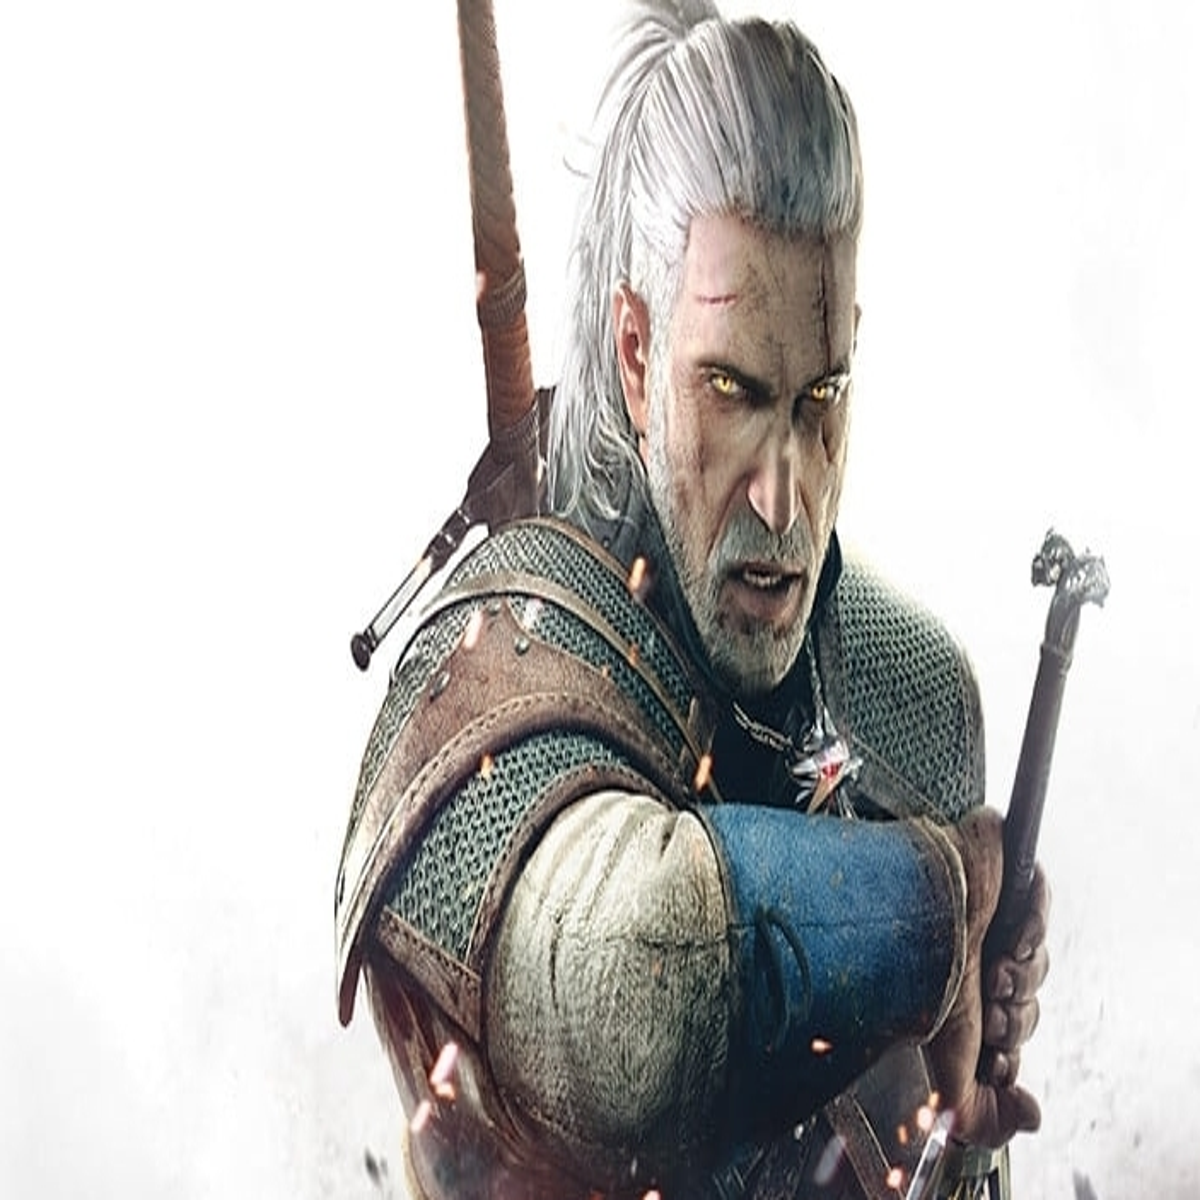 The Witcher 3: Incredibly Ambitious Mods